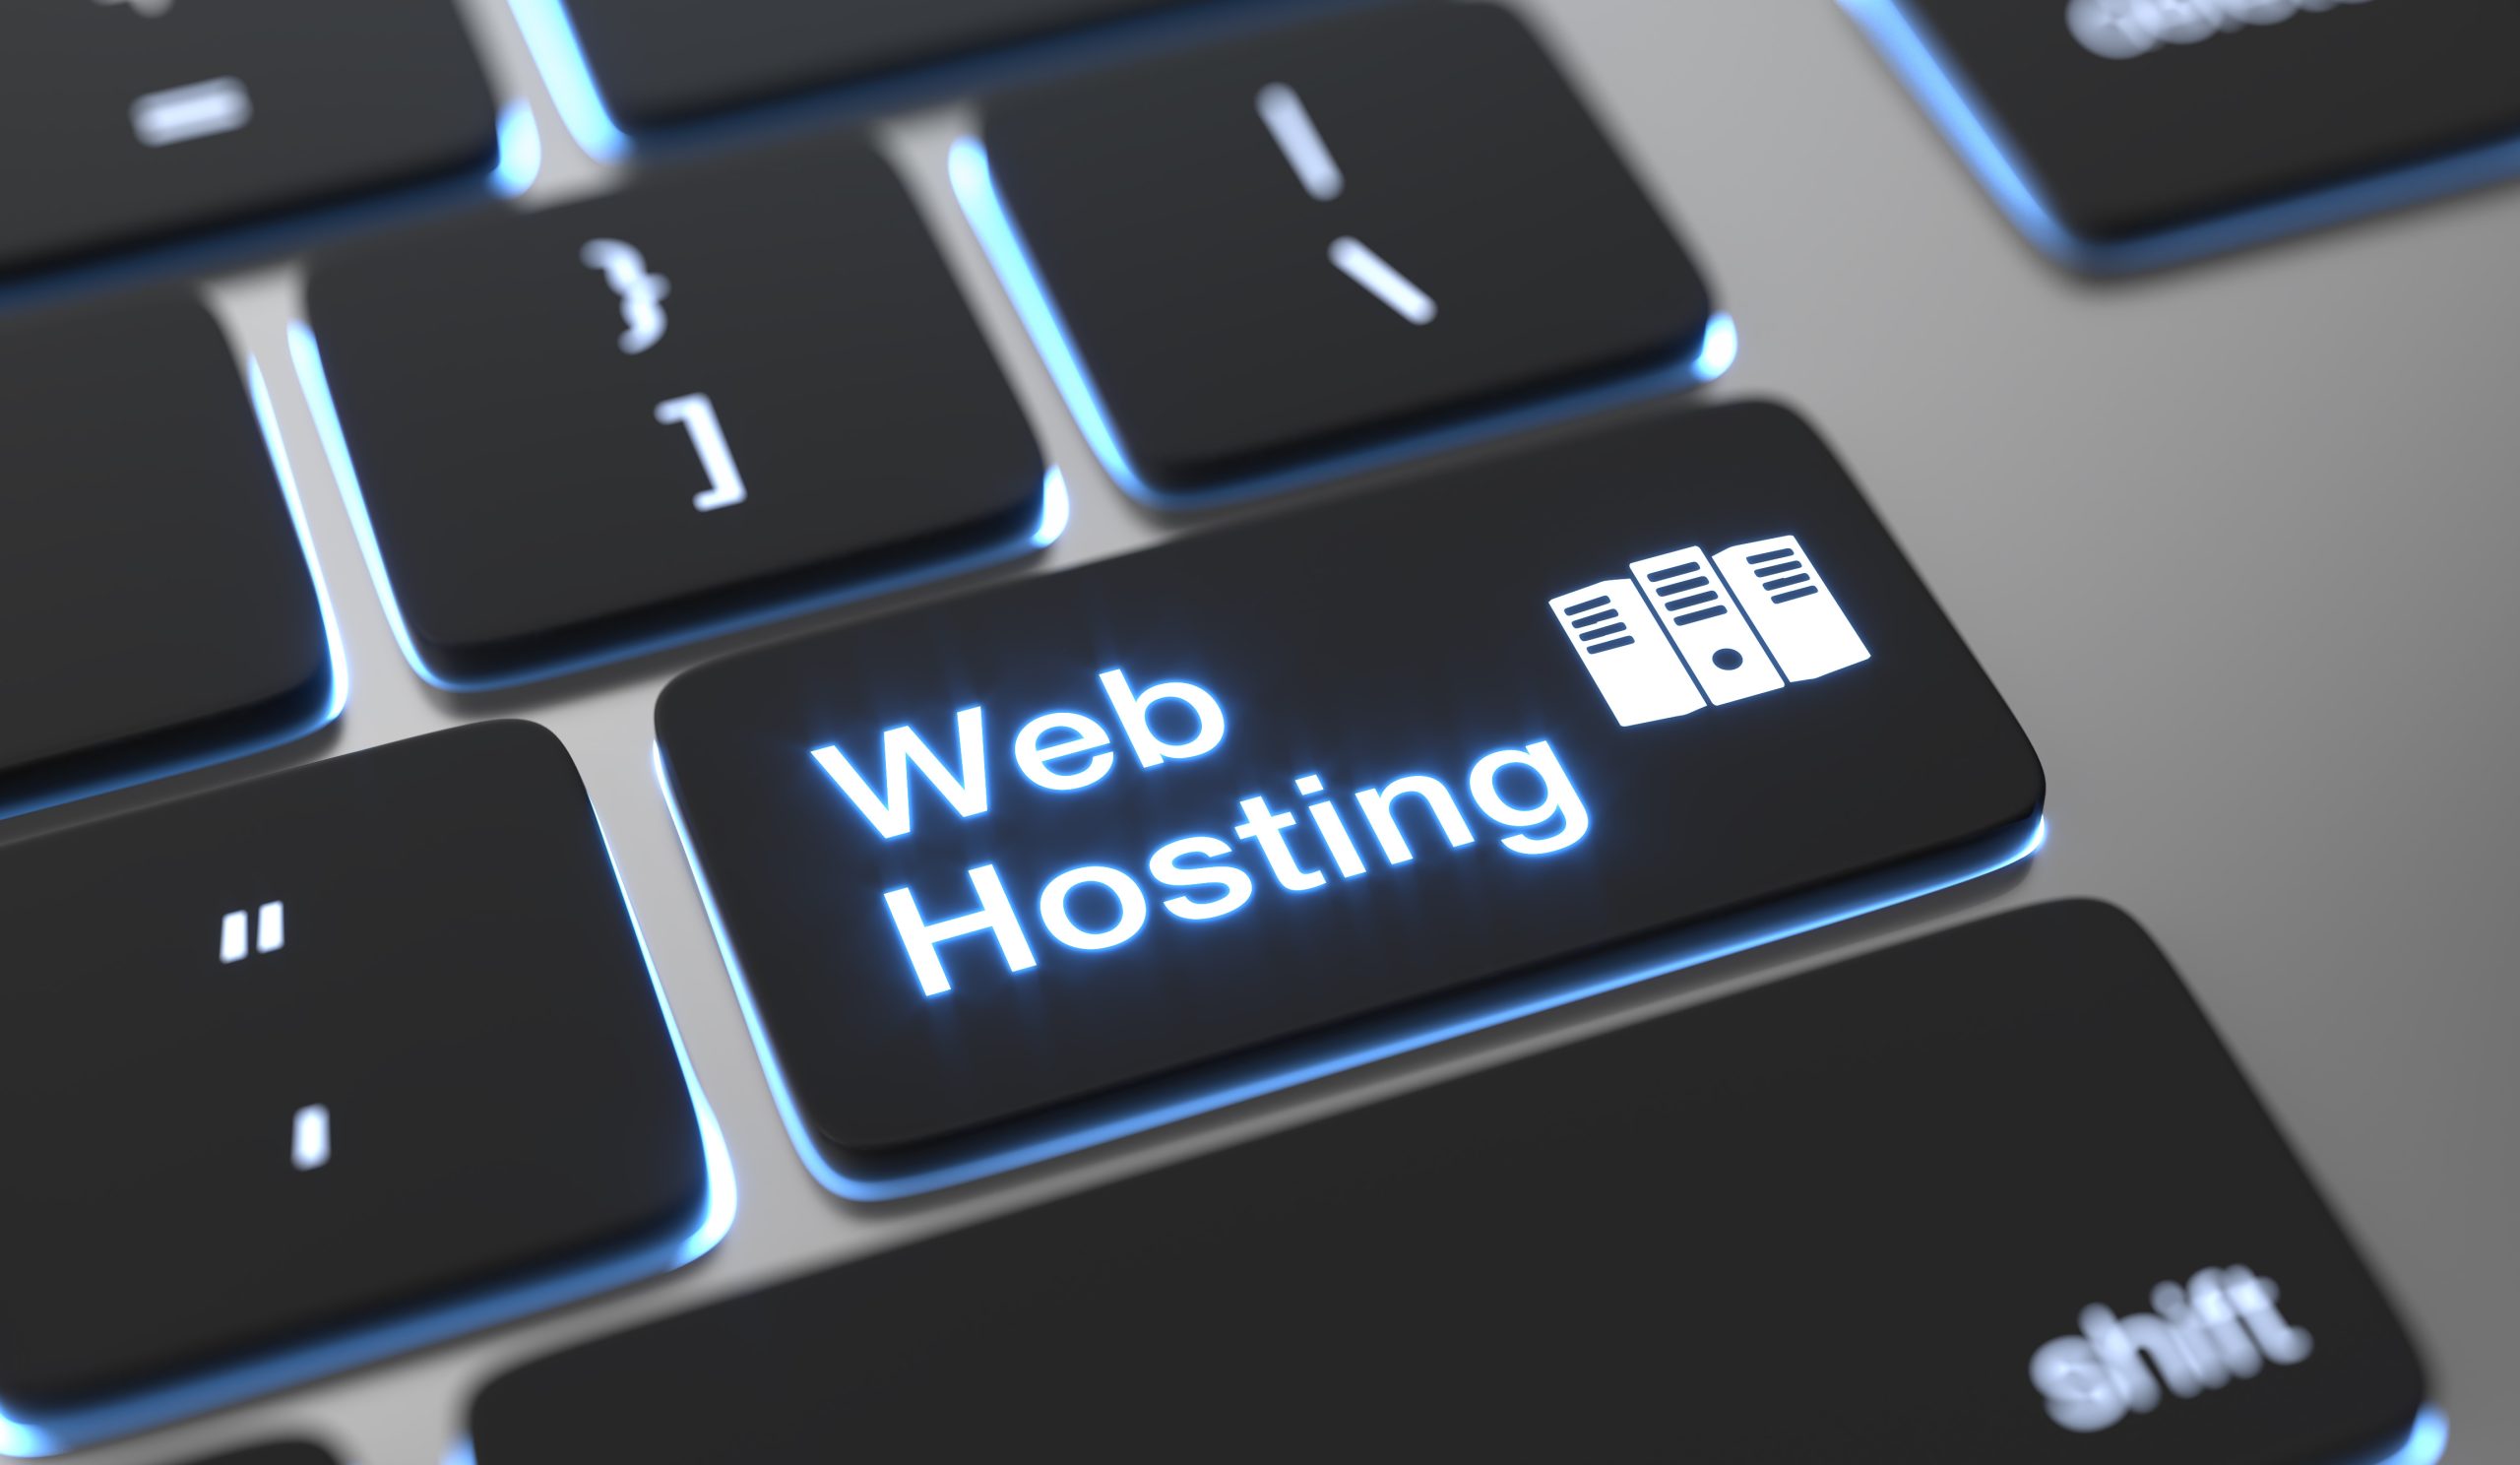 How Web Hosting Can Affect Your Business: Choose PJZNY for Web Hosting!